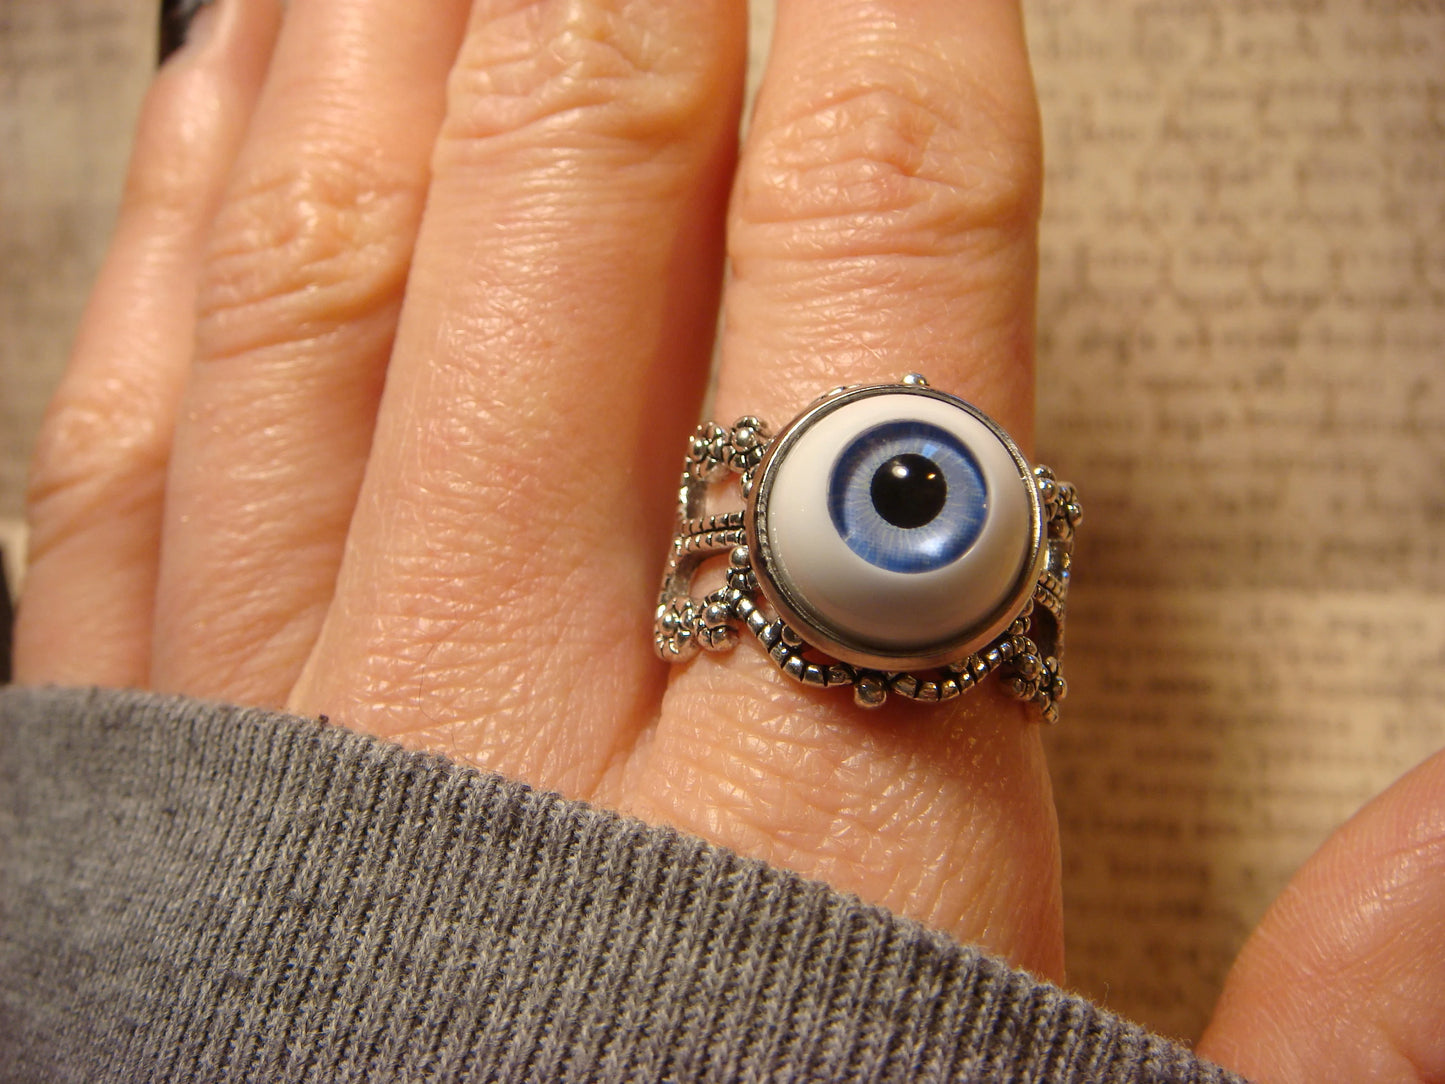 Eyeball Filigree Ring in Antique Silver and Blue - Adjustable